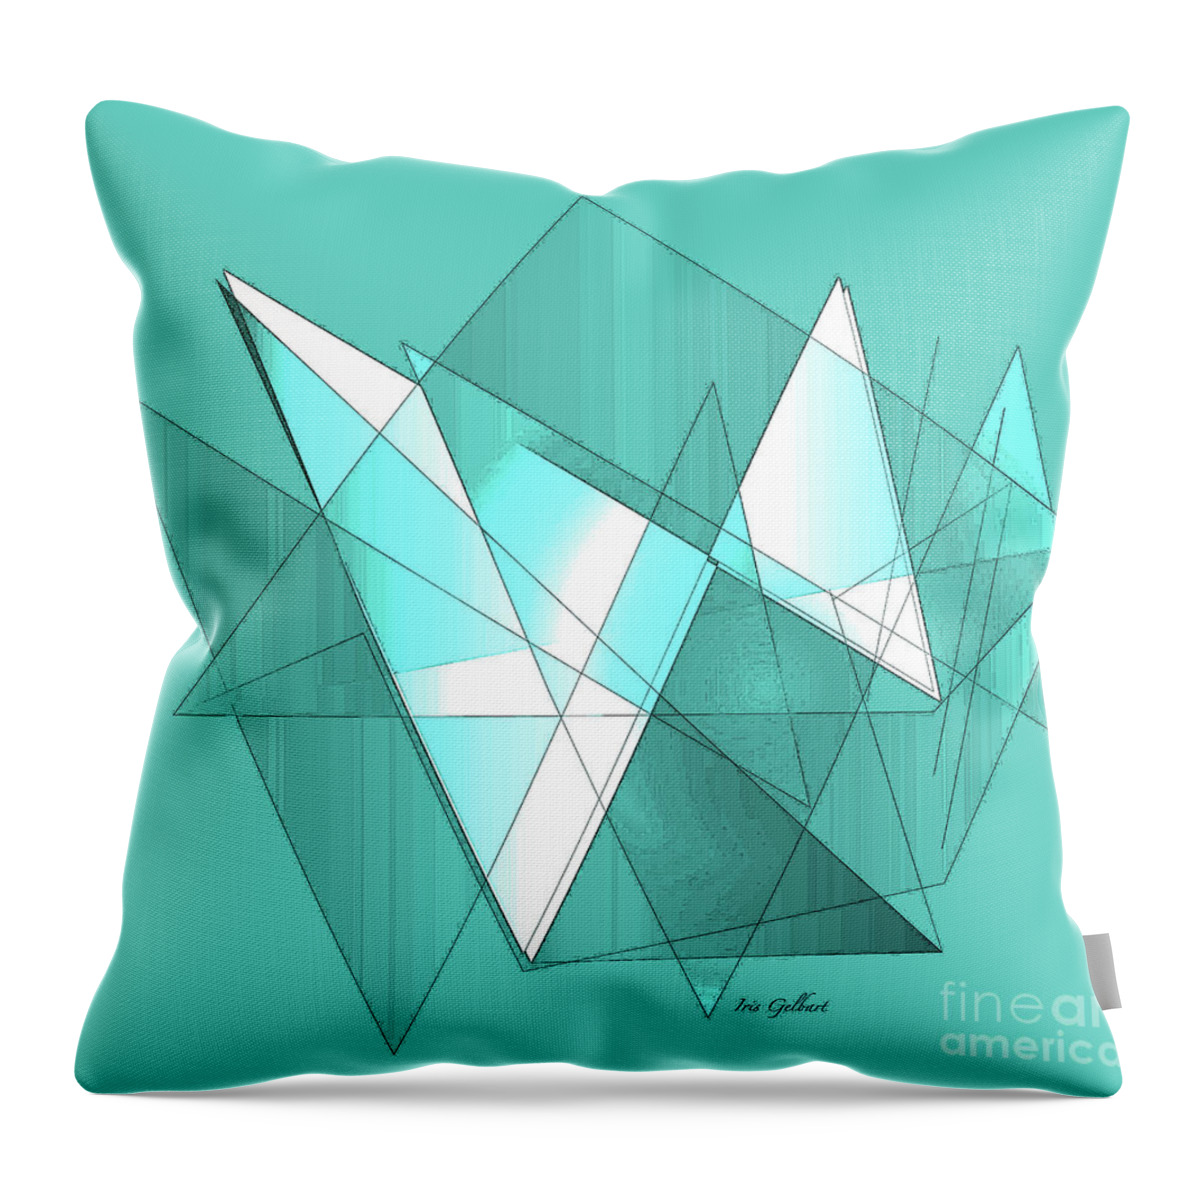 Abstract Throw Pillow featuring the digital art Action #2 by Iris Gelbart